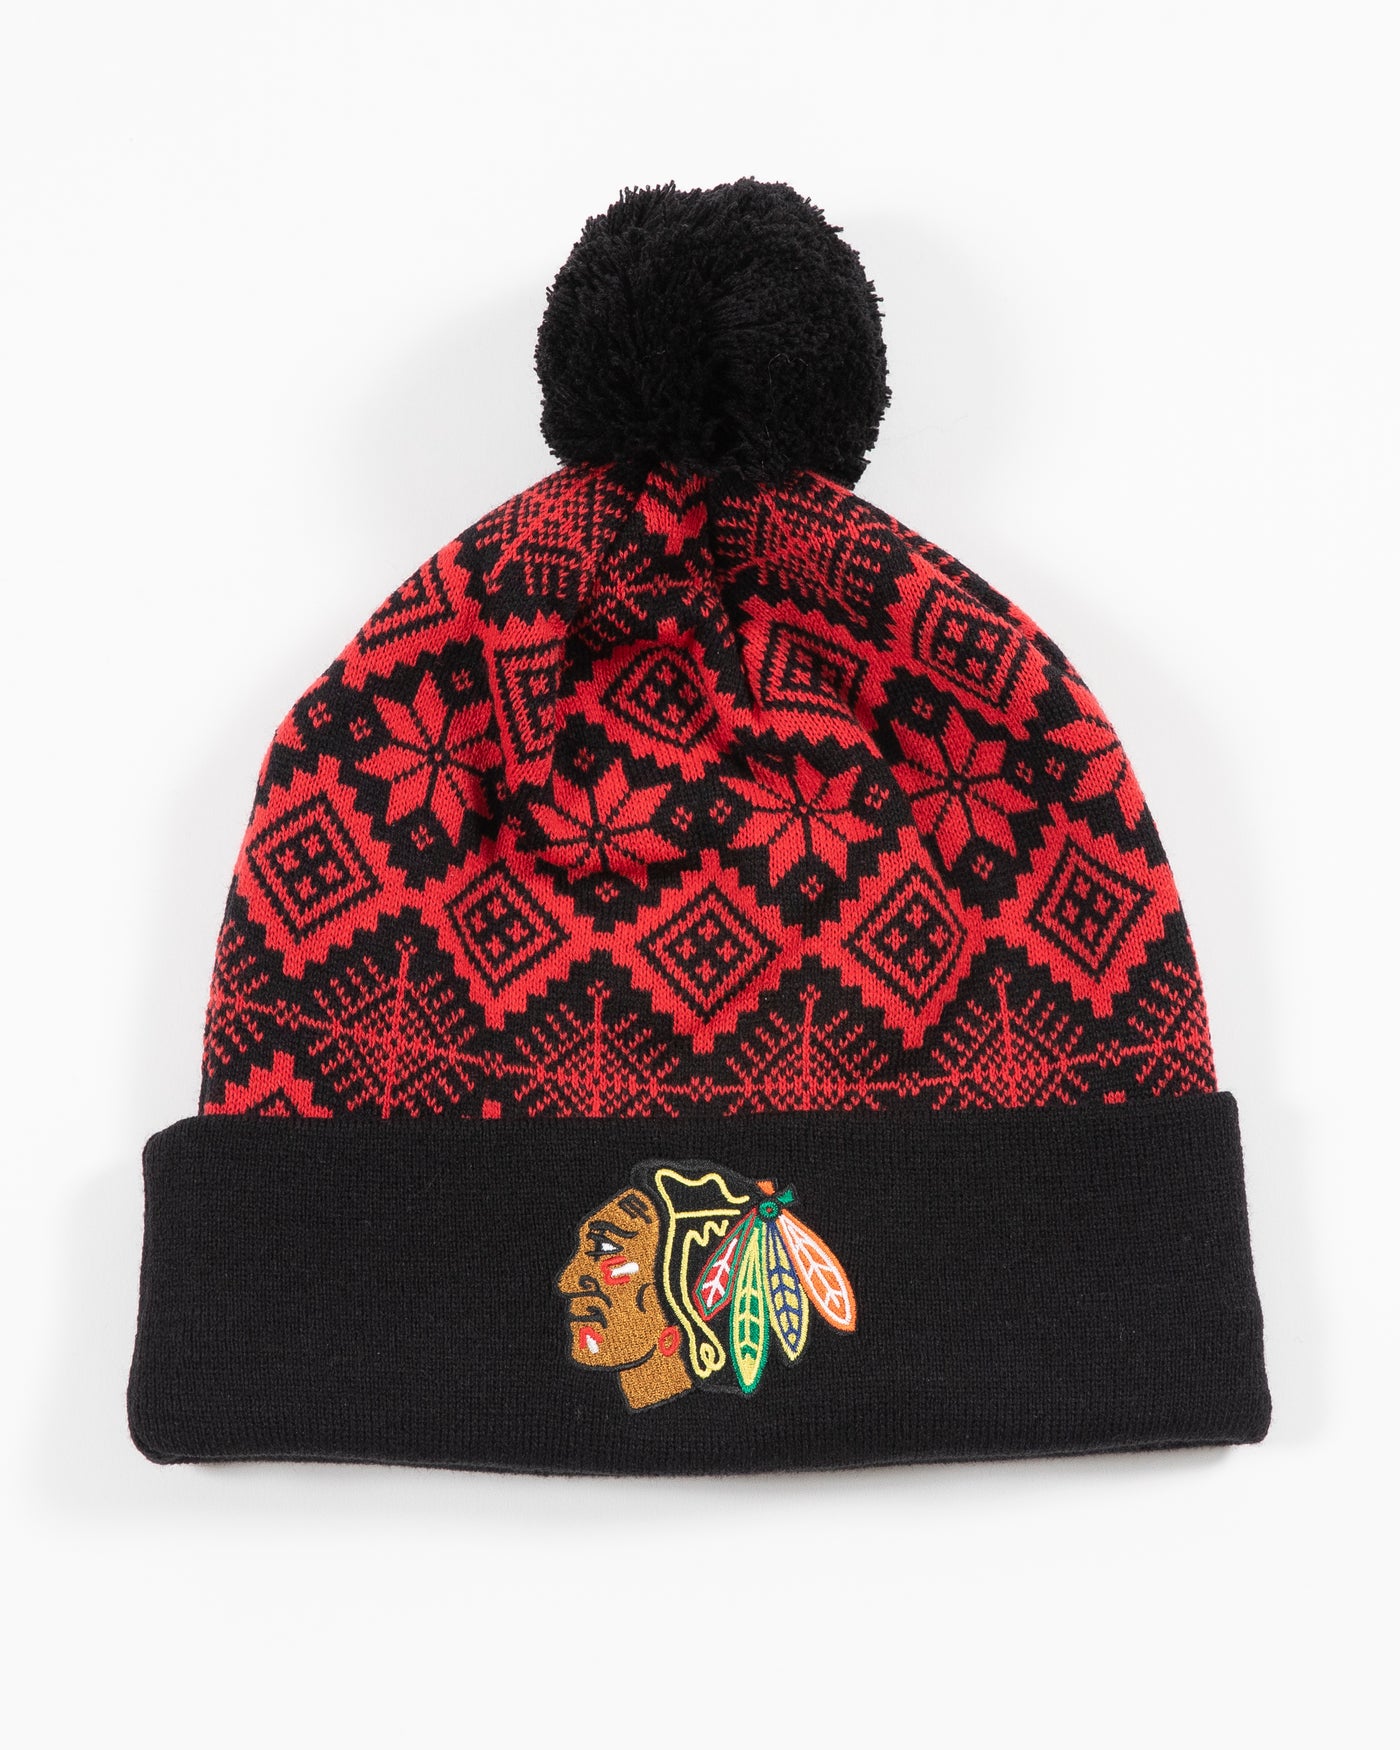 CCM Chicago Blackhawks knit hat with holiday pattern in red and black with black pom and primary logo embroidered on the front black cuff - front view